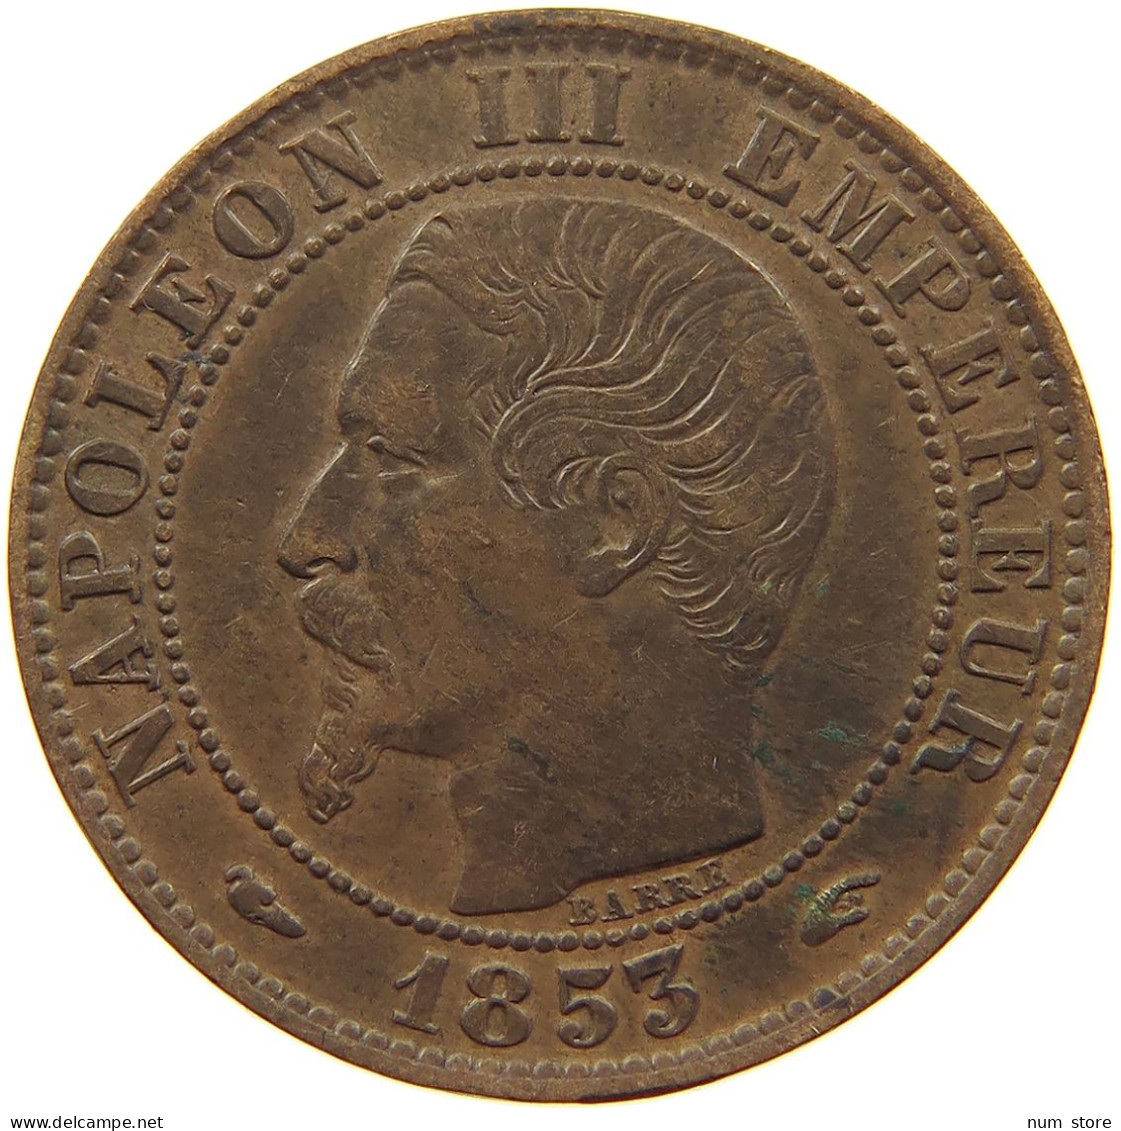 FRANCE 5 CENTIMES 1853 A Napoleon III. (1852-1870) #s077 0379 - 5 Centimes